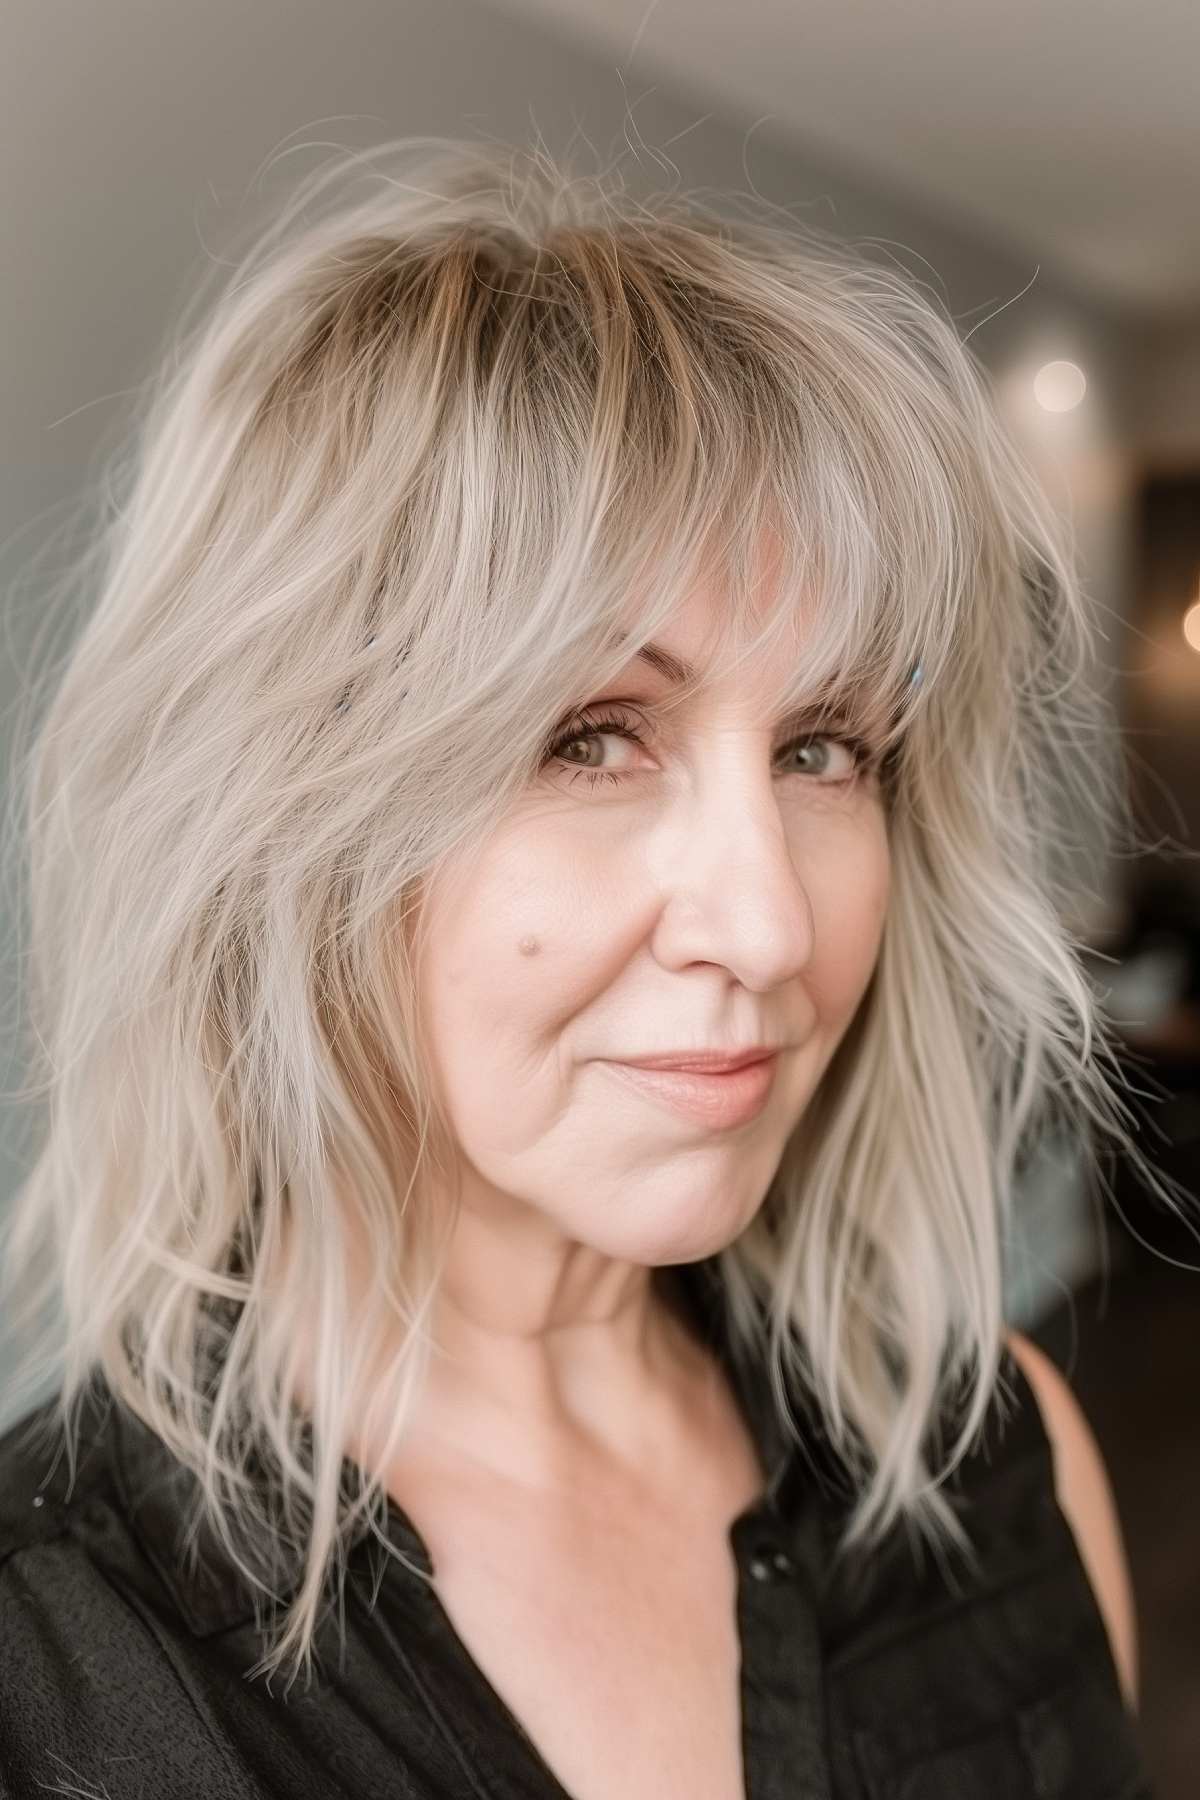 Mature woman with a choppy shag haircut and dynamic bangs that add a lively and textured look.